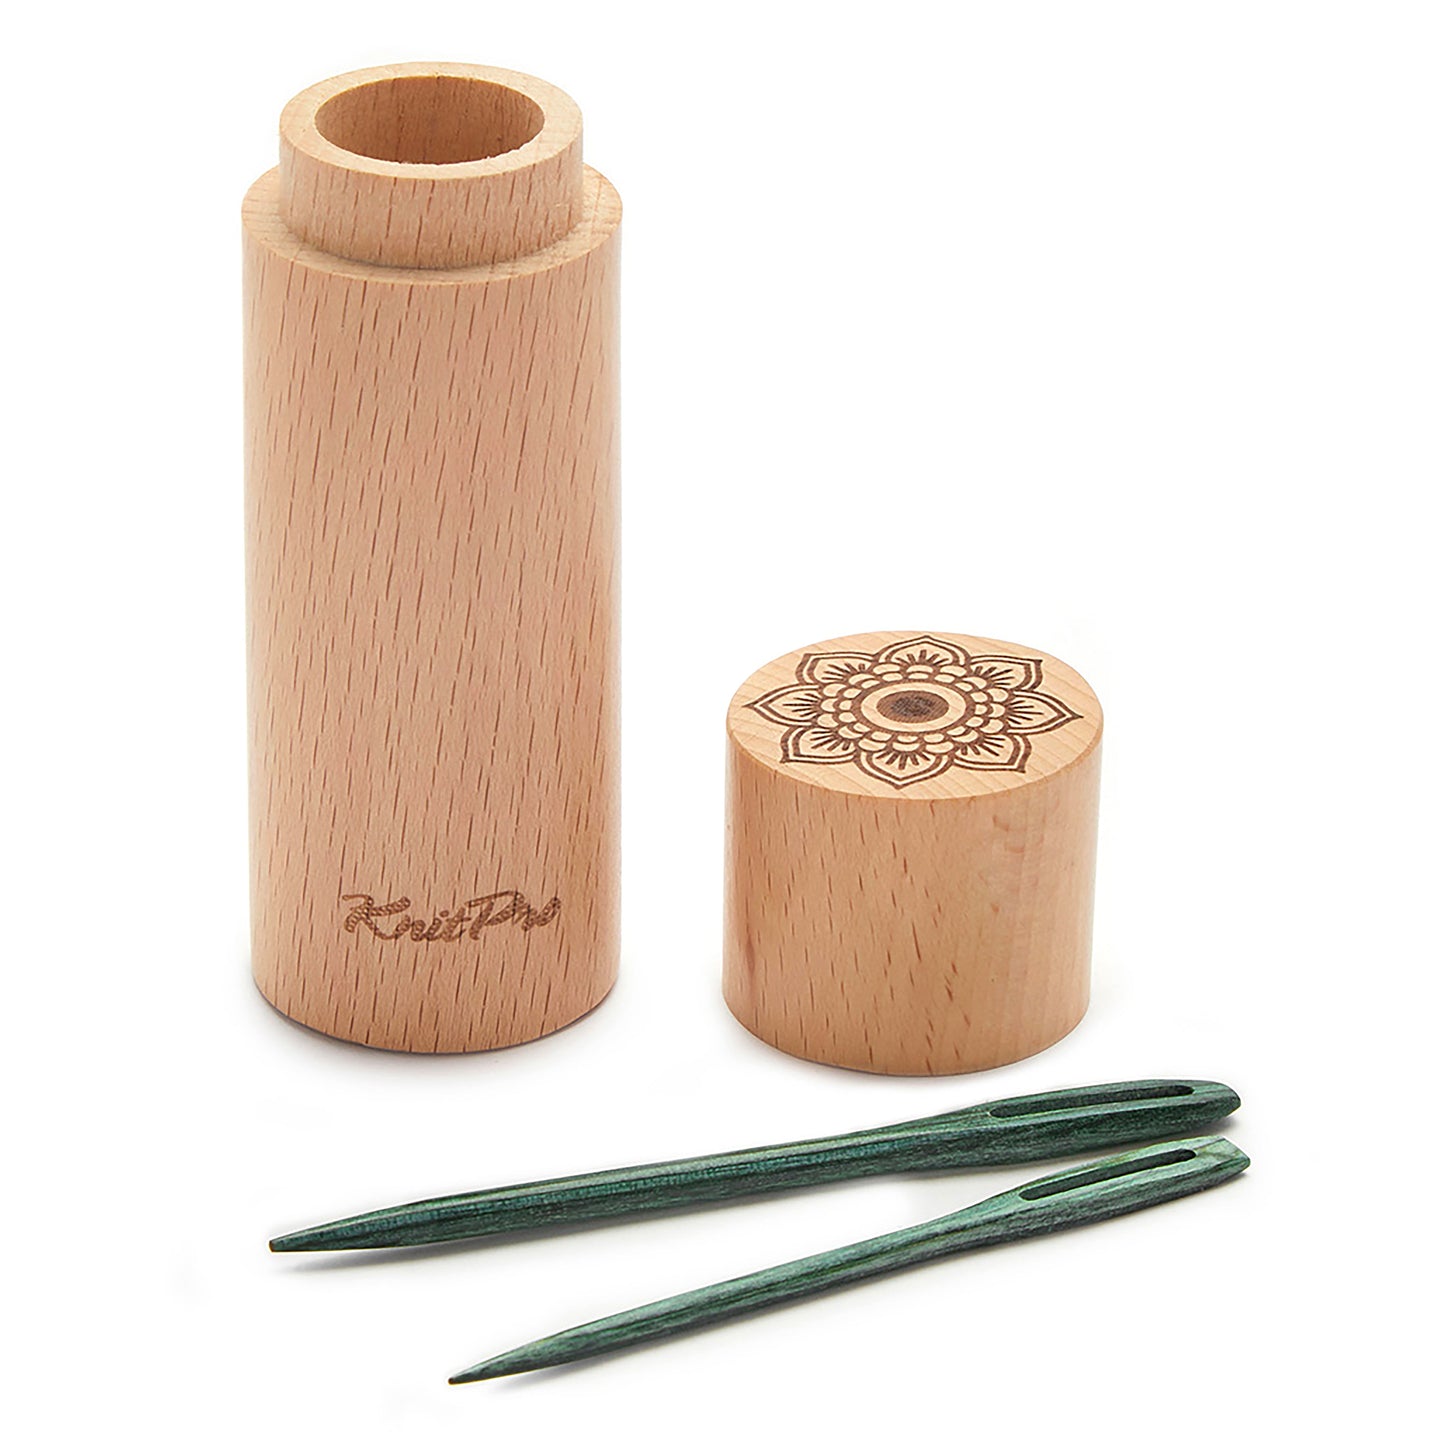 KnitPro The Mindful Collection - Darning Needles